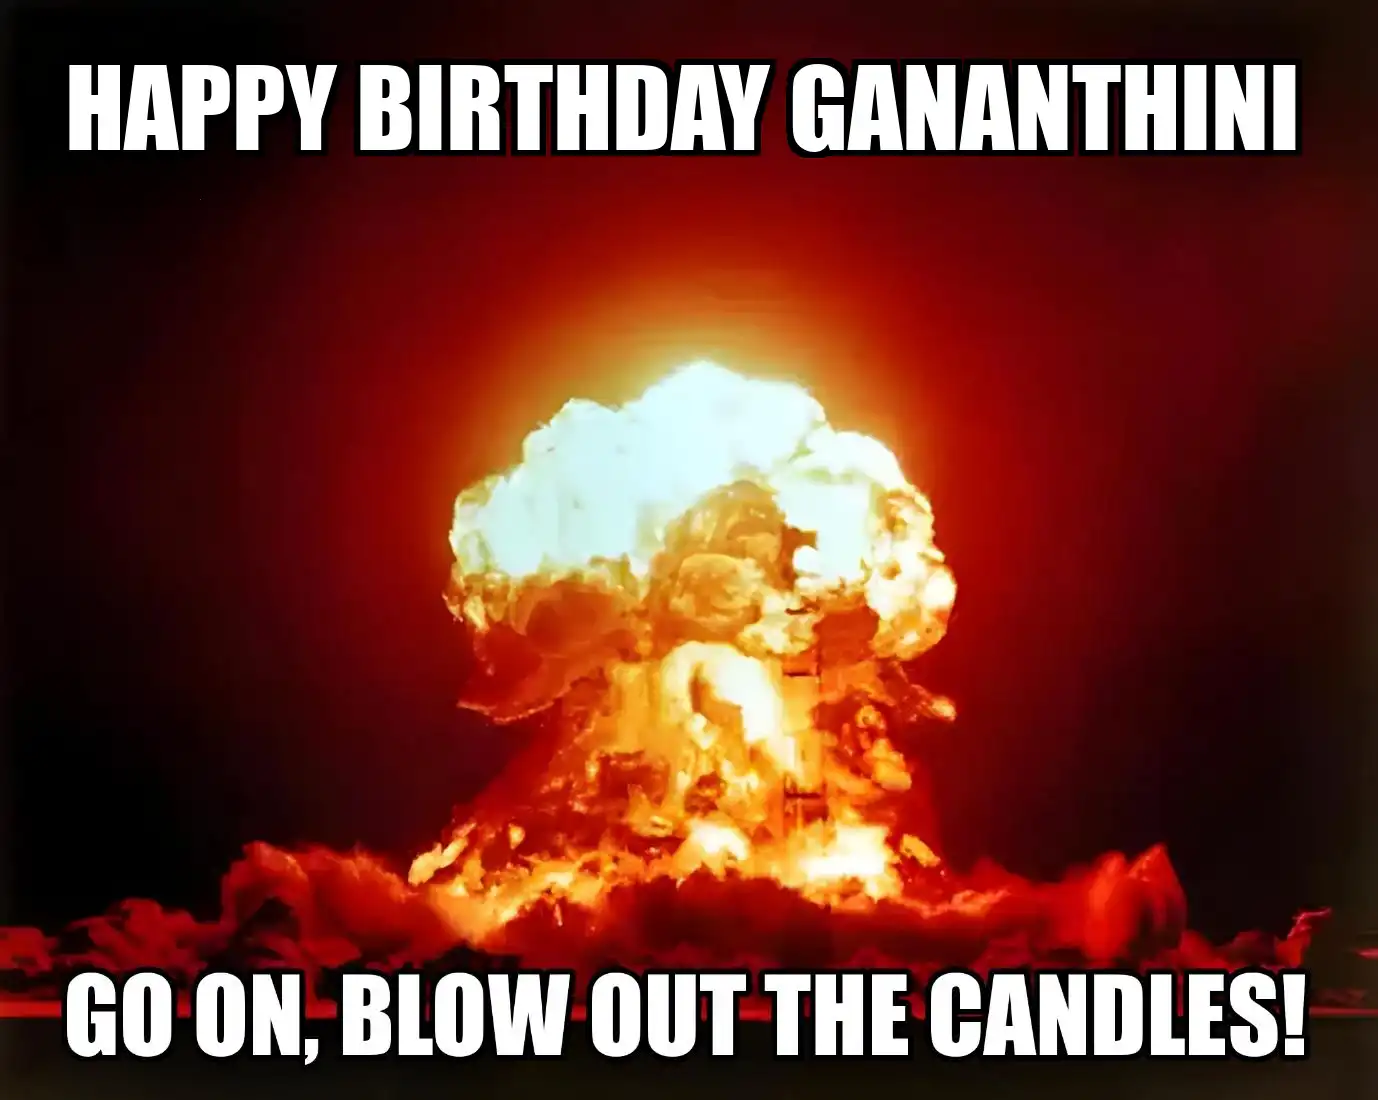 Happy Birthday Gananthini Go On Blow Out The Candles Meme